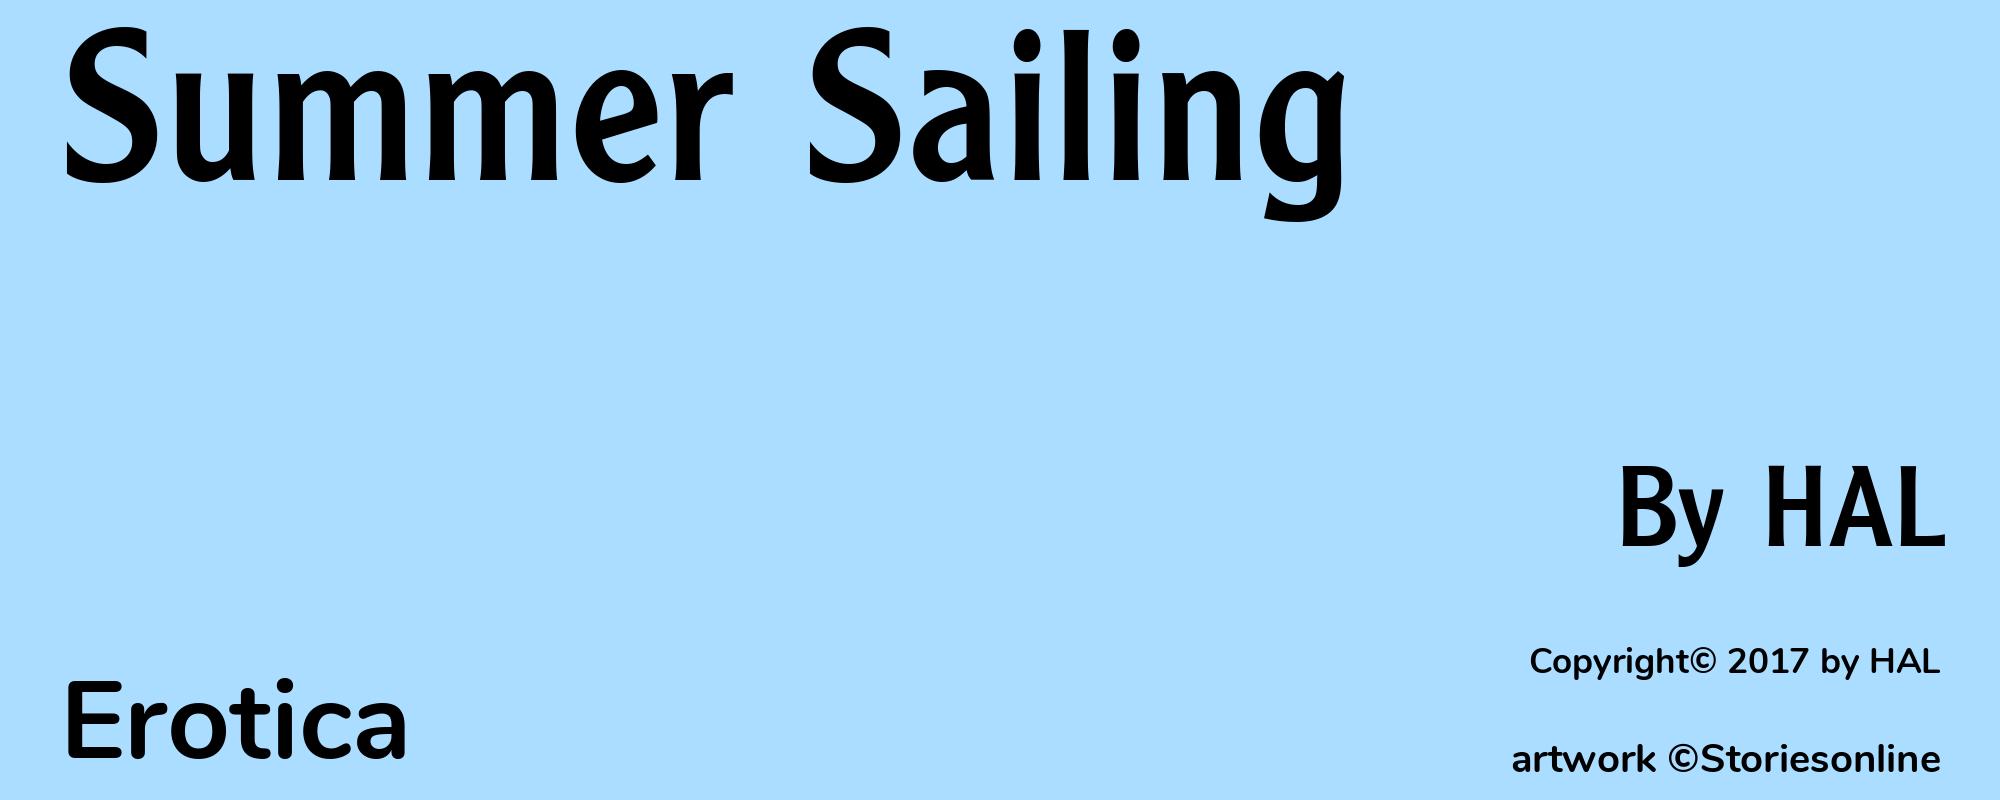 Summer Sailing - Cover